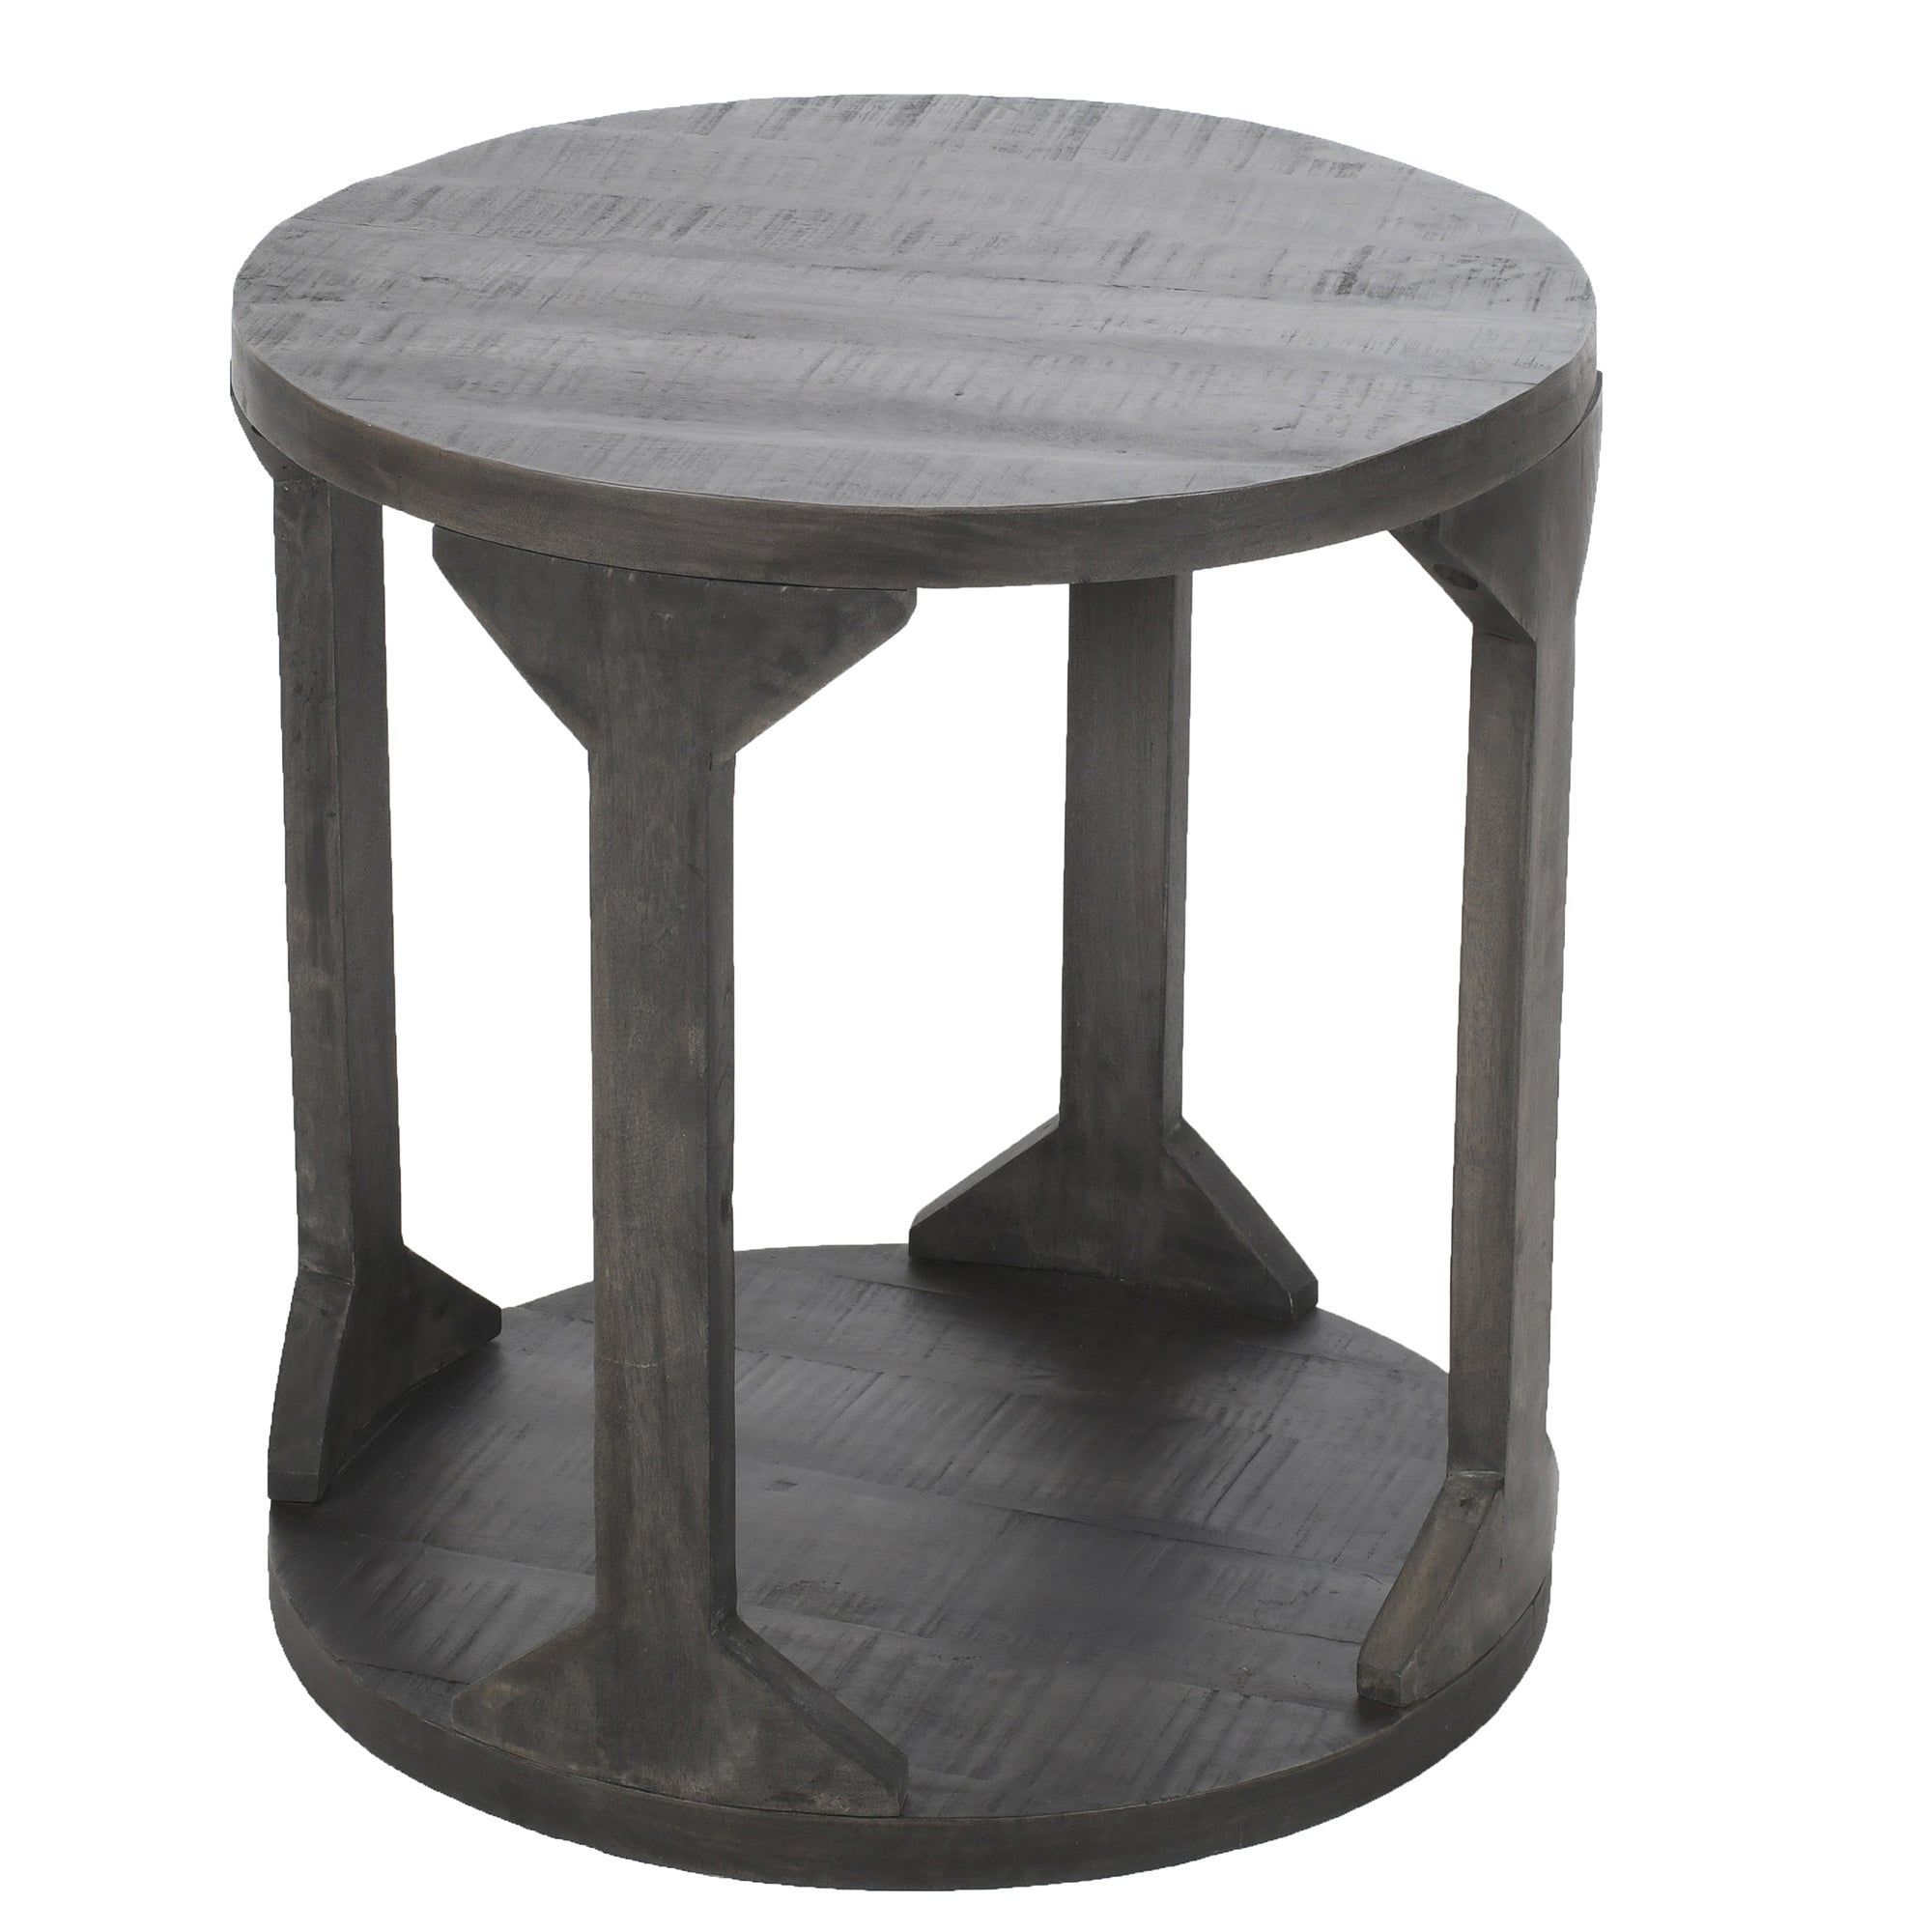 Avni Round Accent Table in Distressed Natural